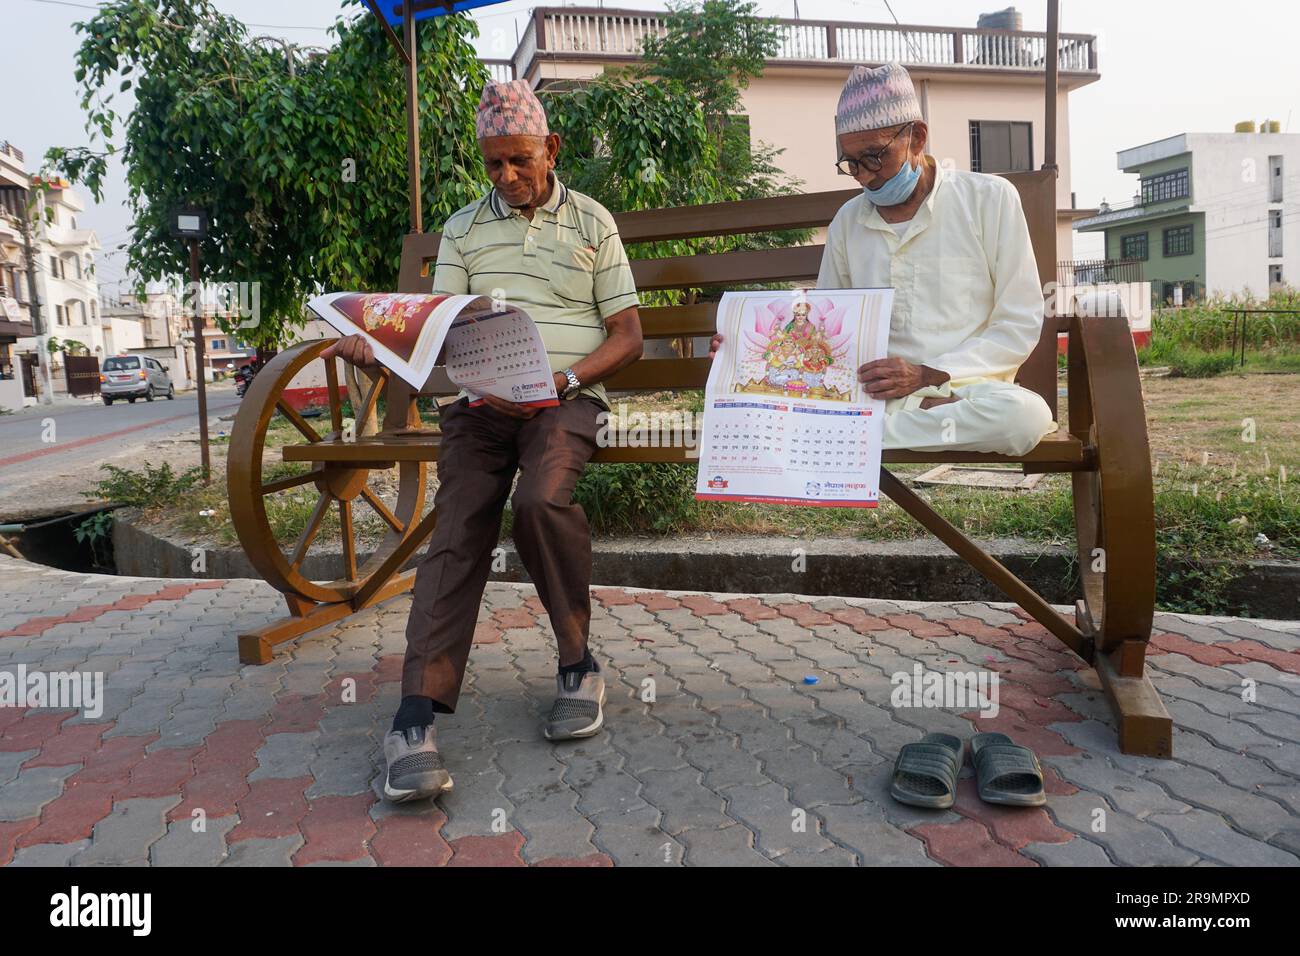 Govinda Prasad Kadariya, left, and Yogyanath Pokharel peruse an insurance company’s promotional calendars at a park in Birtamod, Jhapa district, Nepal on May 15, 2023. They became good friends two years ago and come to the park together every evening. (Maya Neupane/Global Press Journal) Stock Photo